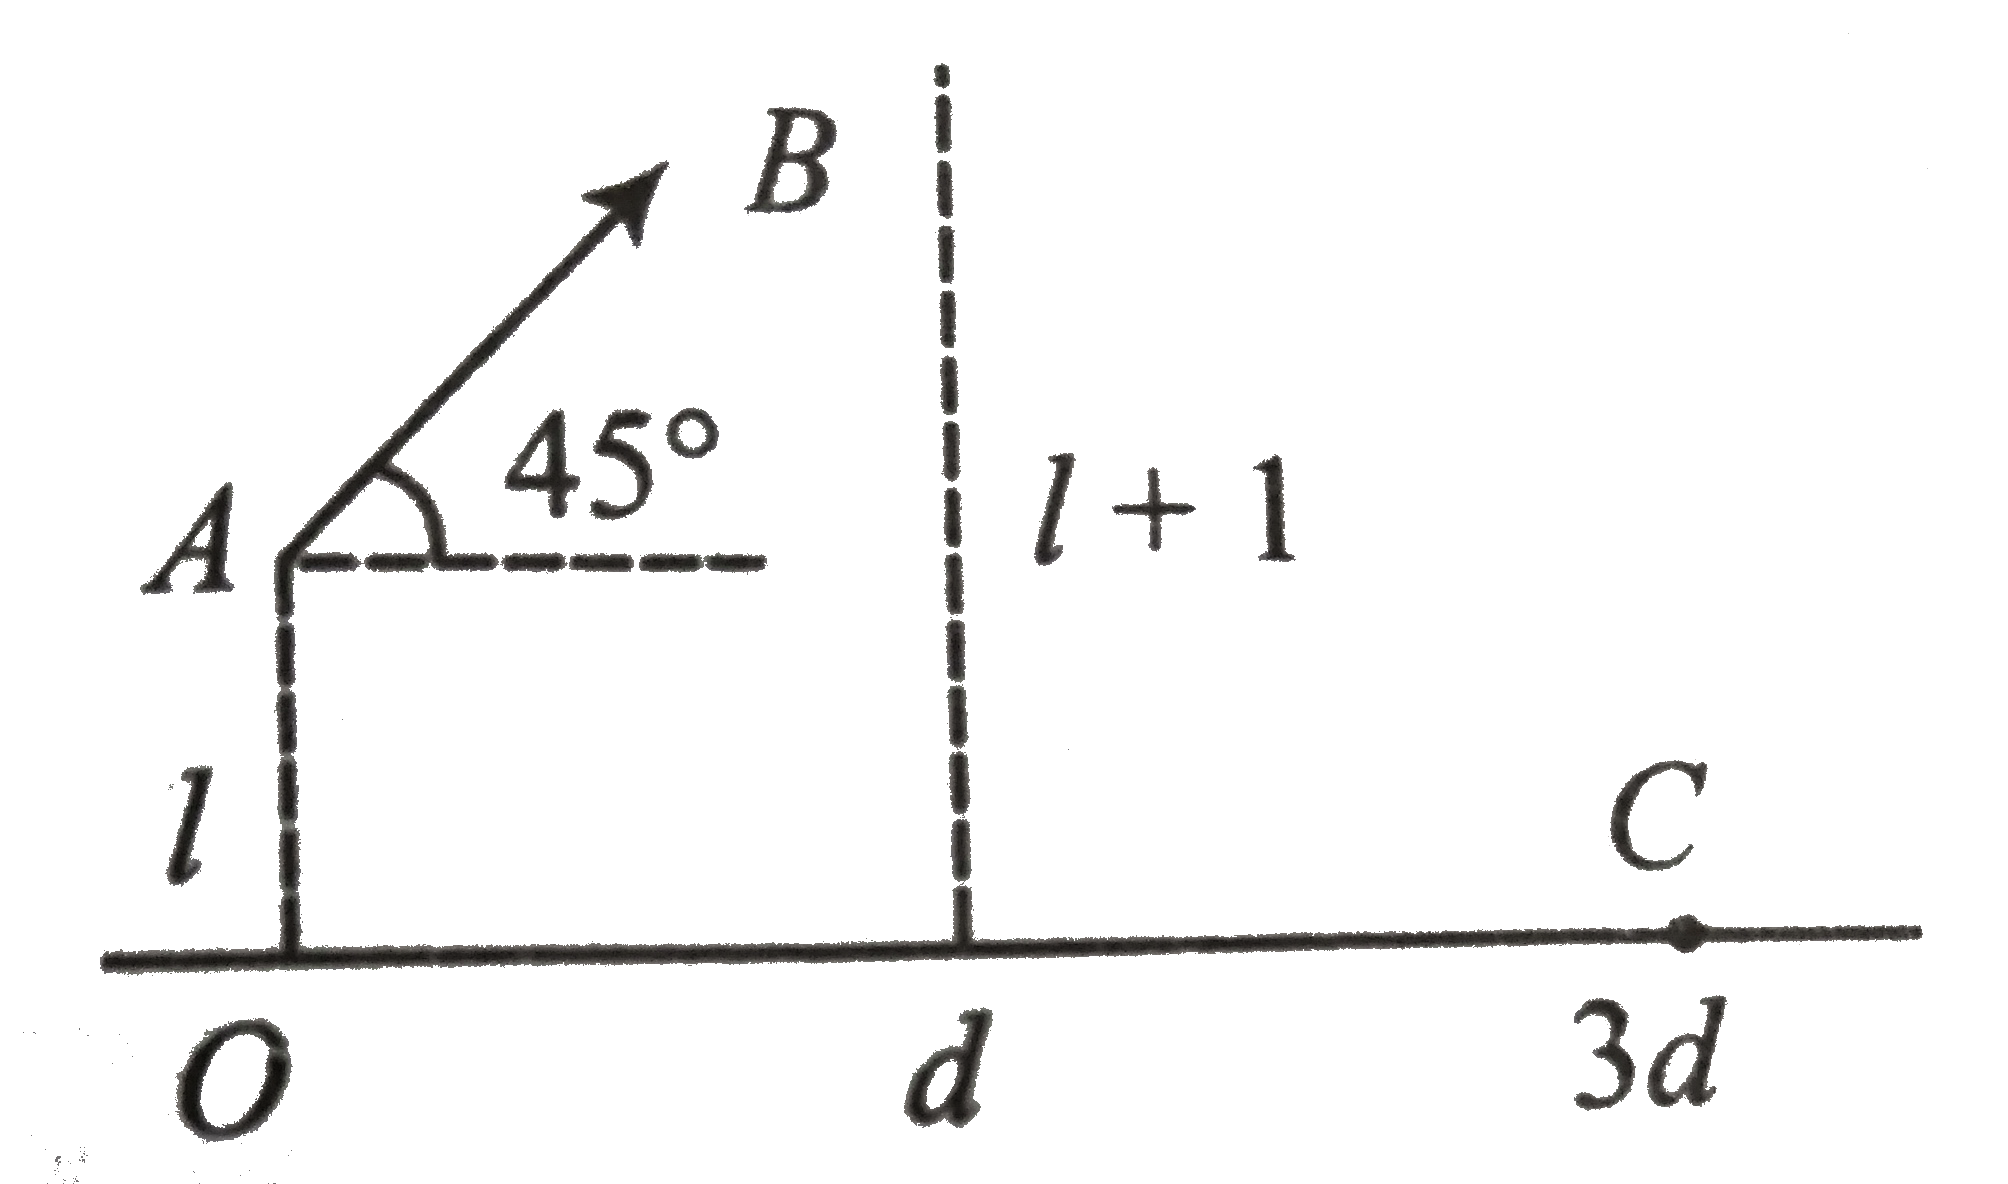 A projectile is launched at time t = 0 from point A which is at height 1 m above the floor with speed v ms^(-1) and at and angle theta = 45^@ with the floor. It passes through a hoop at B which is 1 m above A and B is the highest point of the trajectory. The horizontal distance between A and B is d meters. The projectile then falls into a basket, hitting the floor at C a horizontal distance 3 d meters from A. Find l (in m).